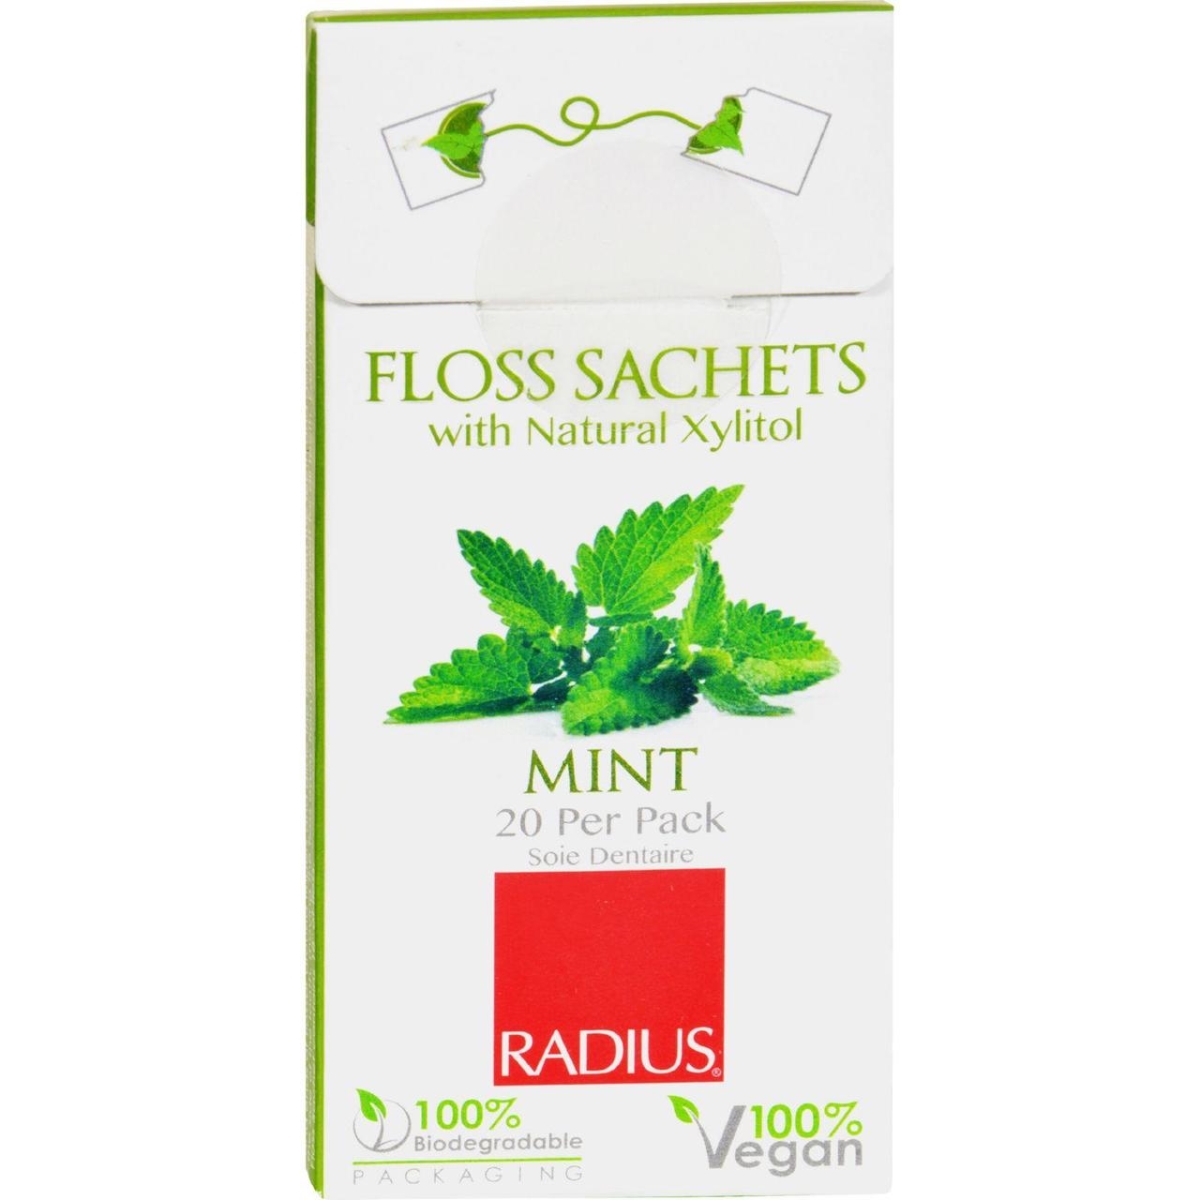 Hg1152305 Floss Sachets With Natural Xylitol - Mint - Case Of 20